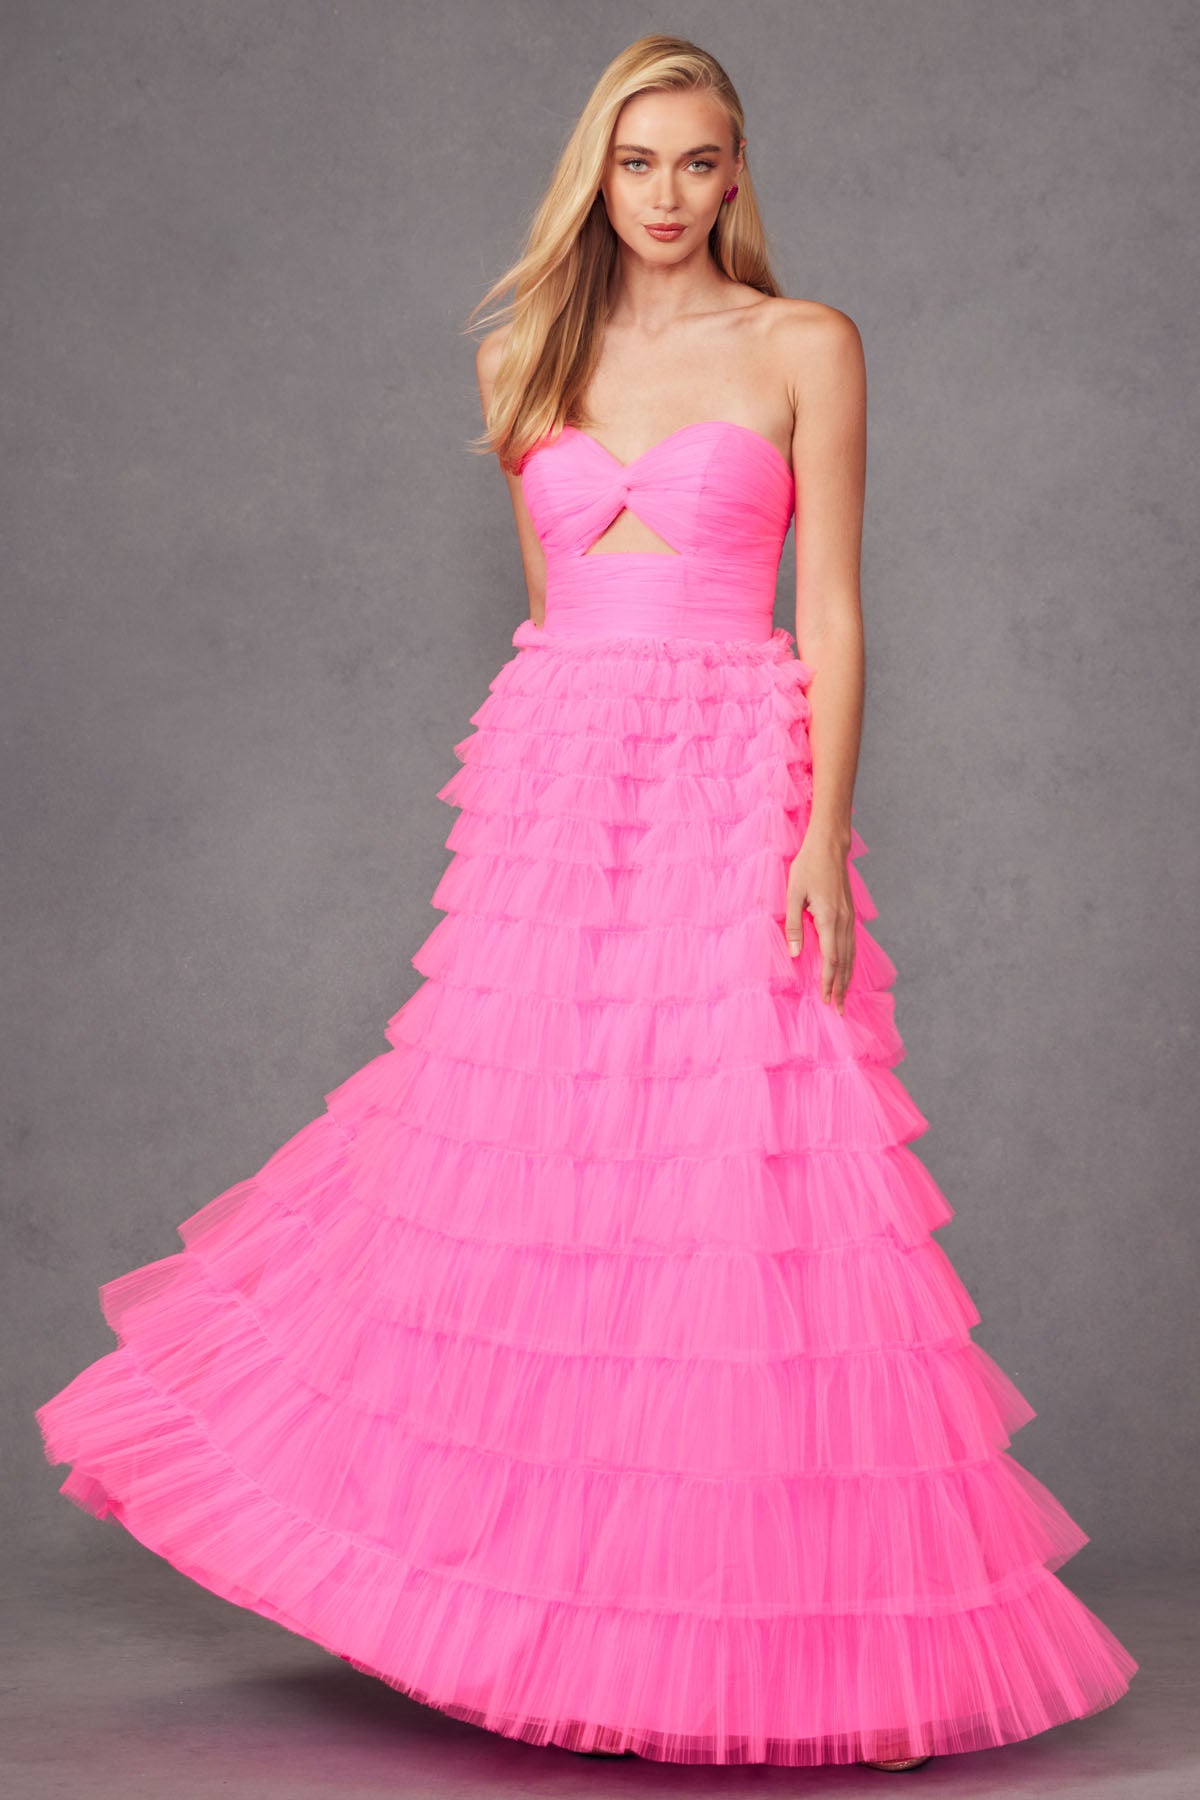 JT24-2456H Tiers Layers Ruffles Strapless Ball Gown With Keyholes Front Lace Up Zipper Closure